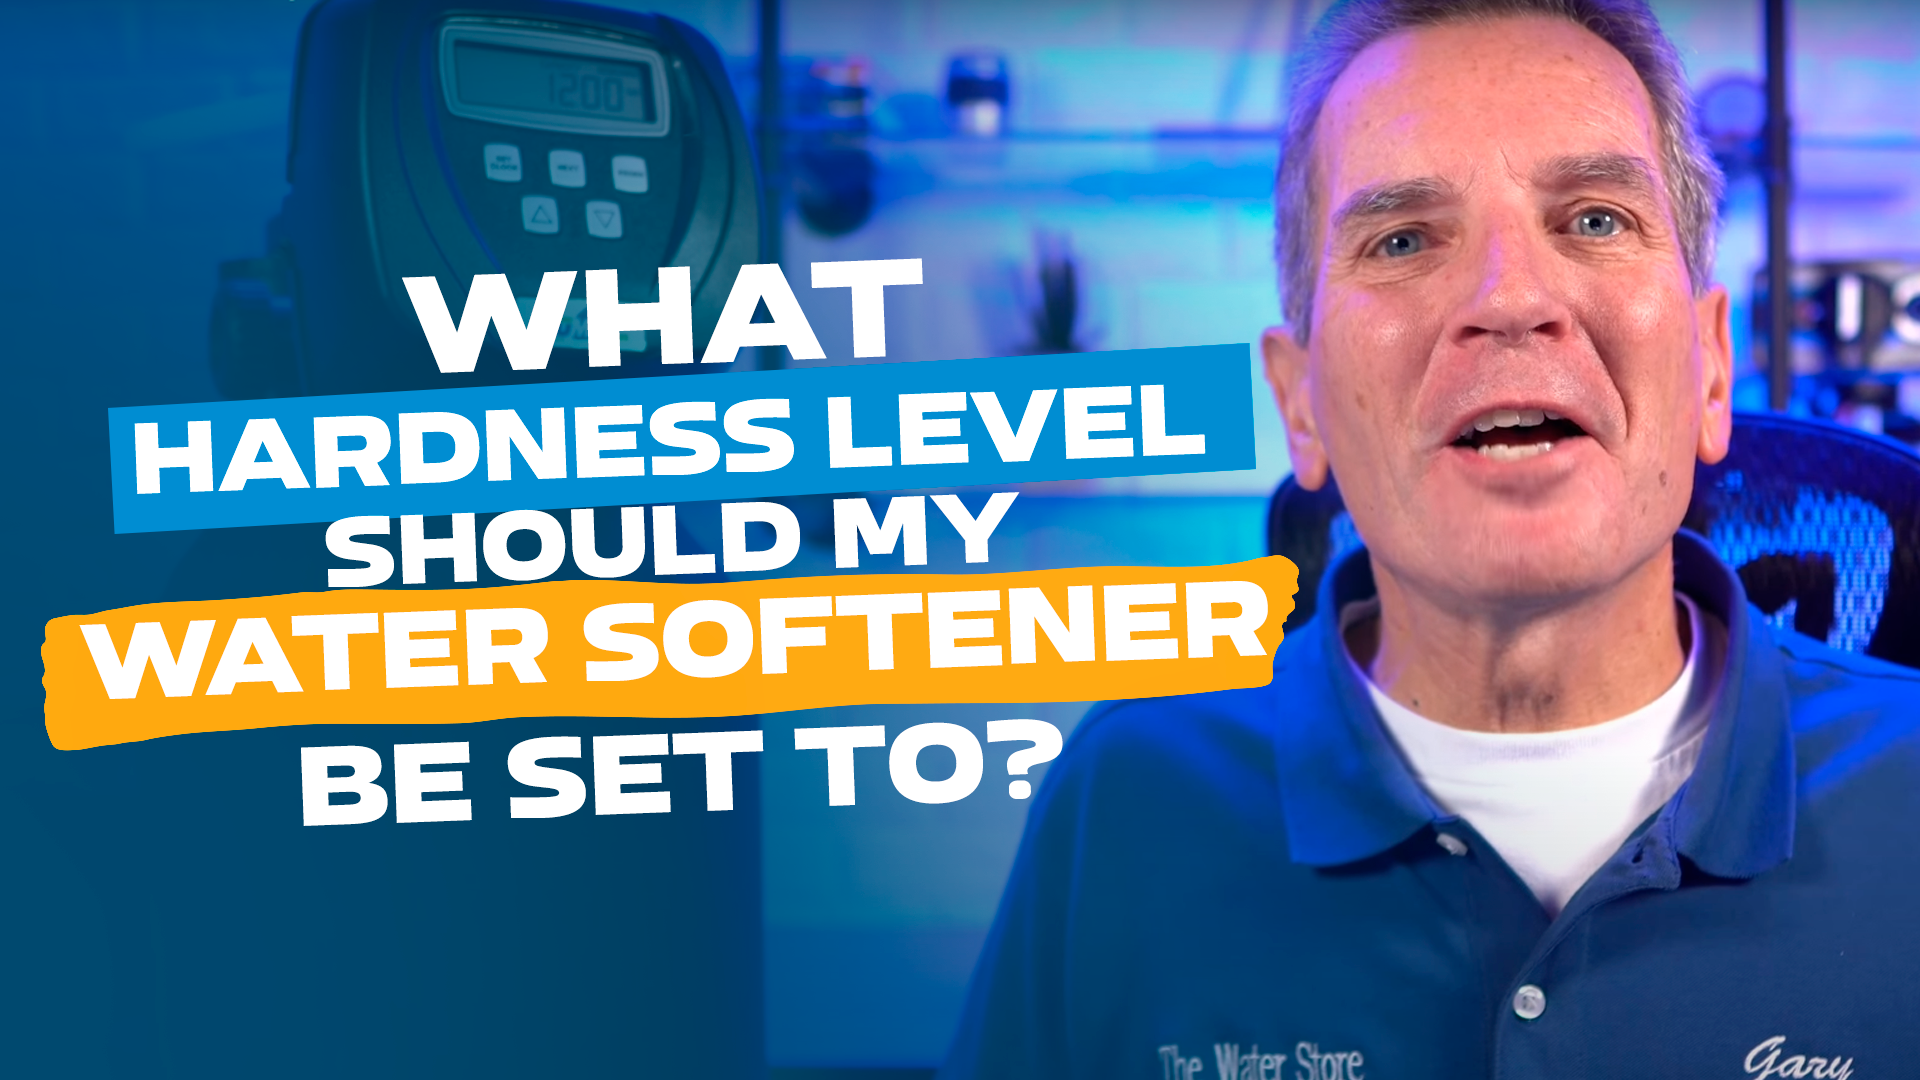 What Hardness Level Should My Water Softener Be Set To?